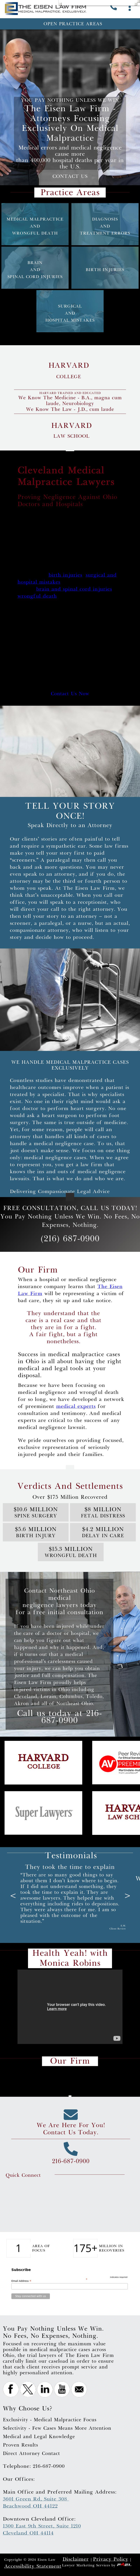 The Eisen Law Firm - Cleveland OH Lawyers